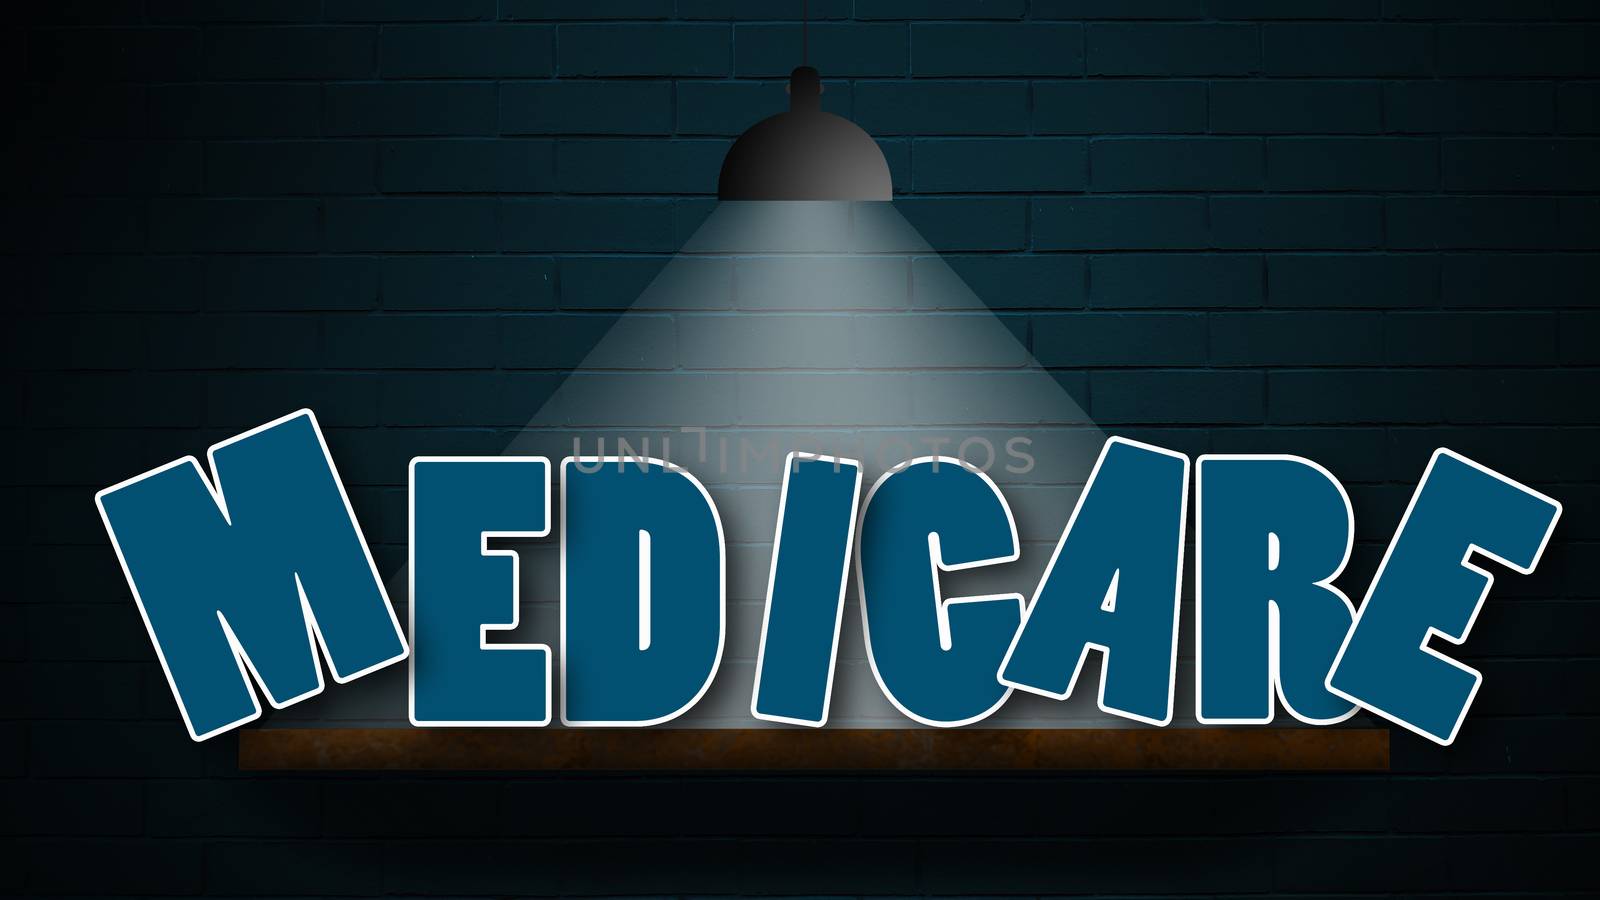 Medicare concept with lamp on the wall. 3d rendering